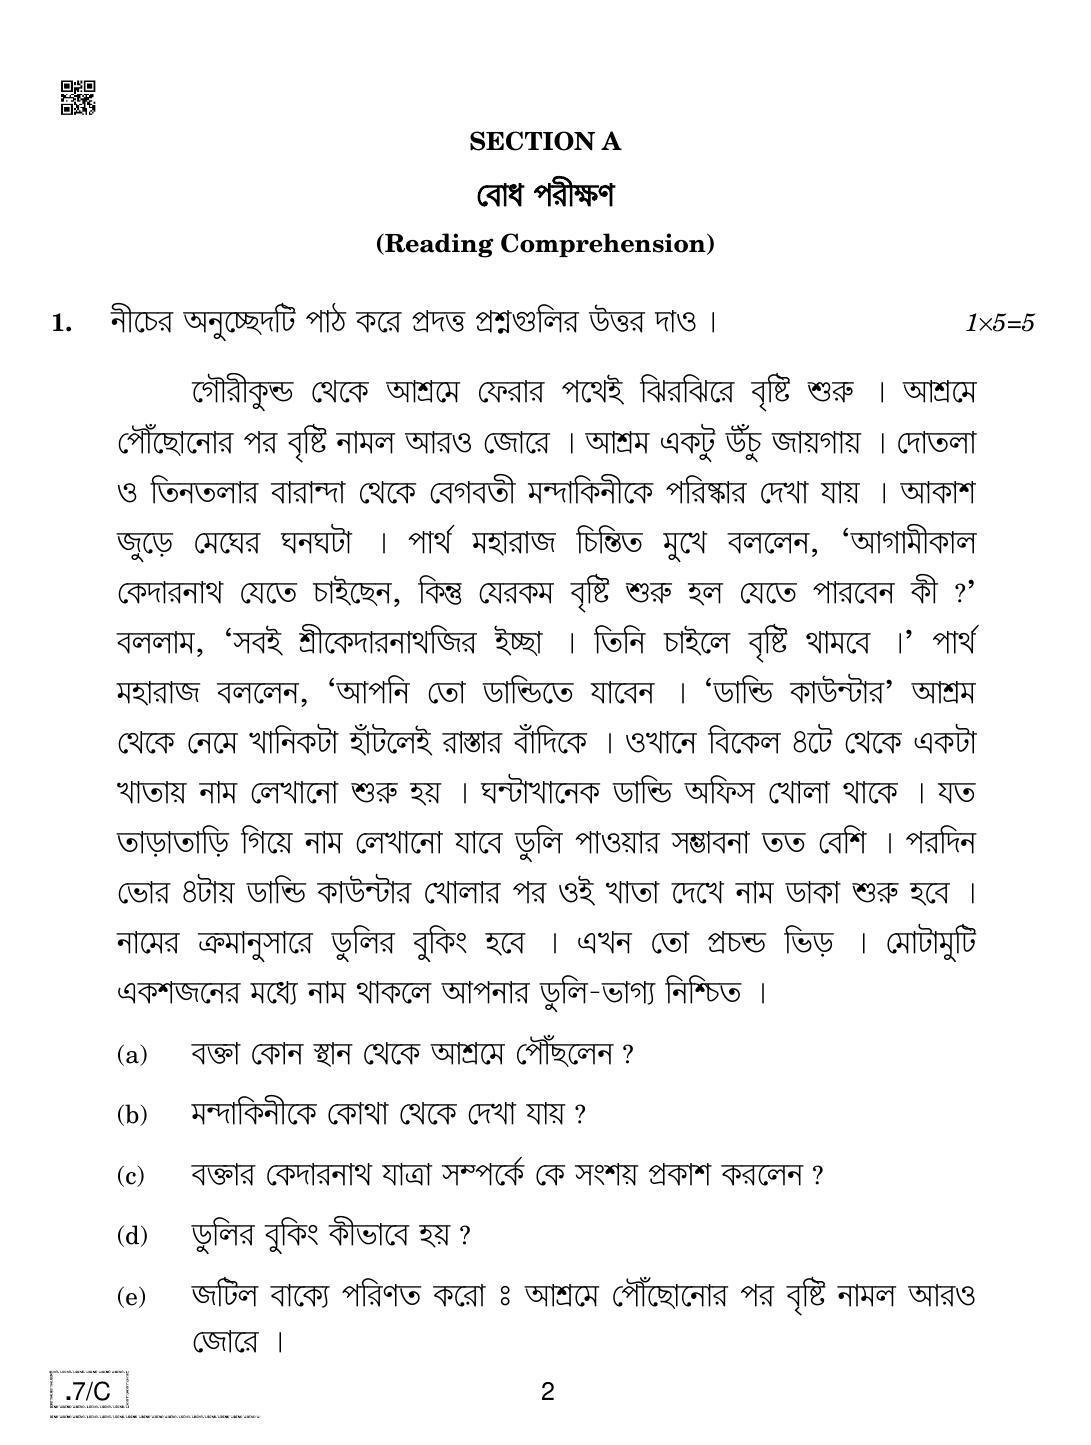 CBSE Class 10 Bengali 2020 Compartment Question Paper - Page 2